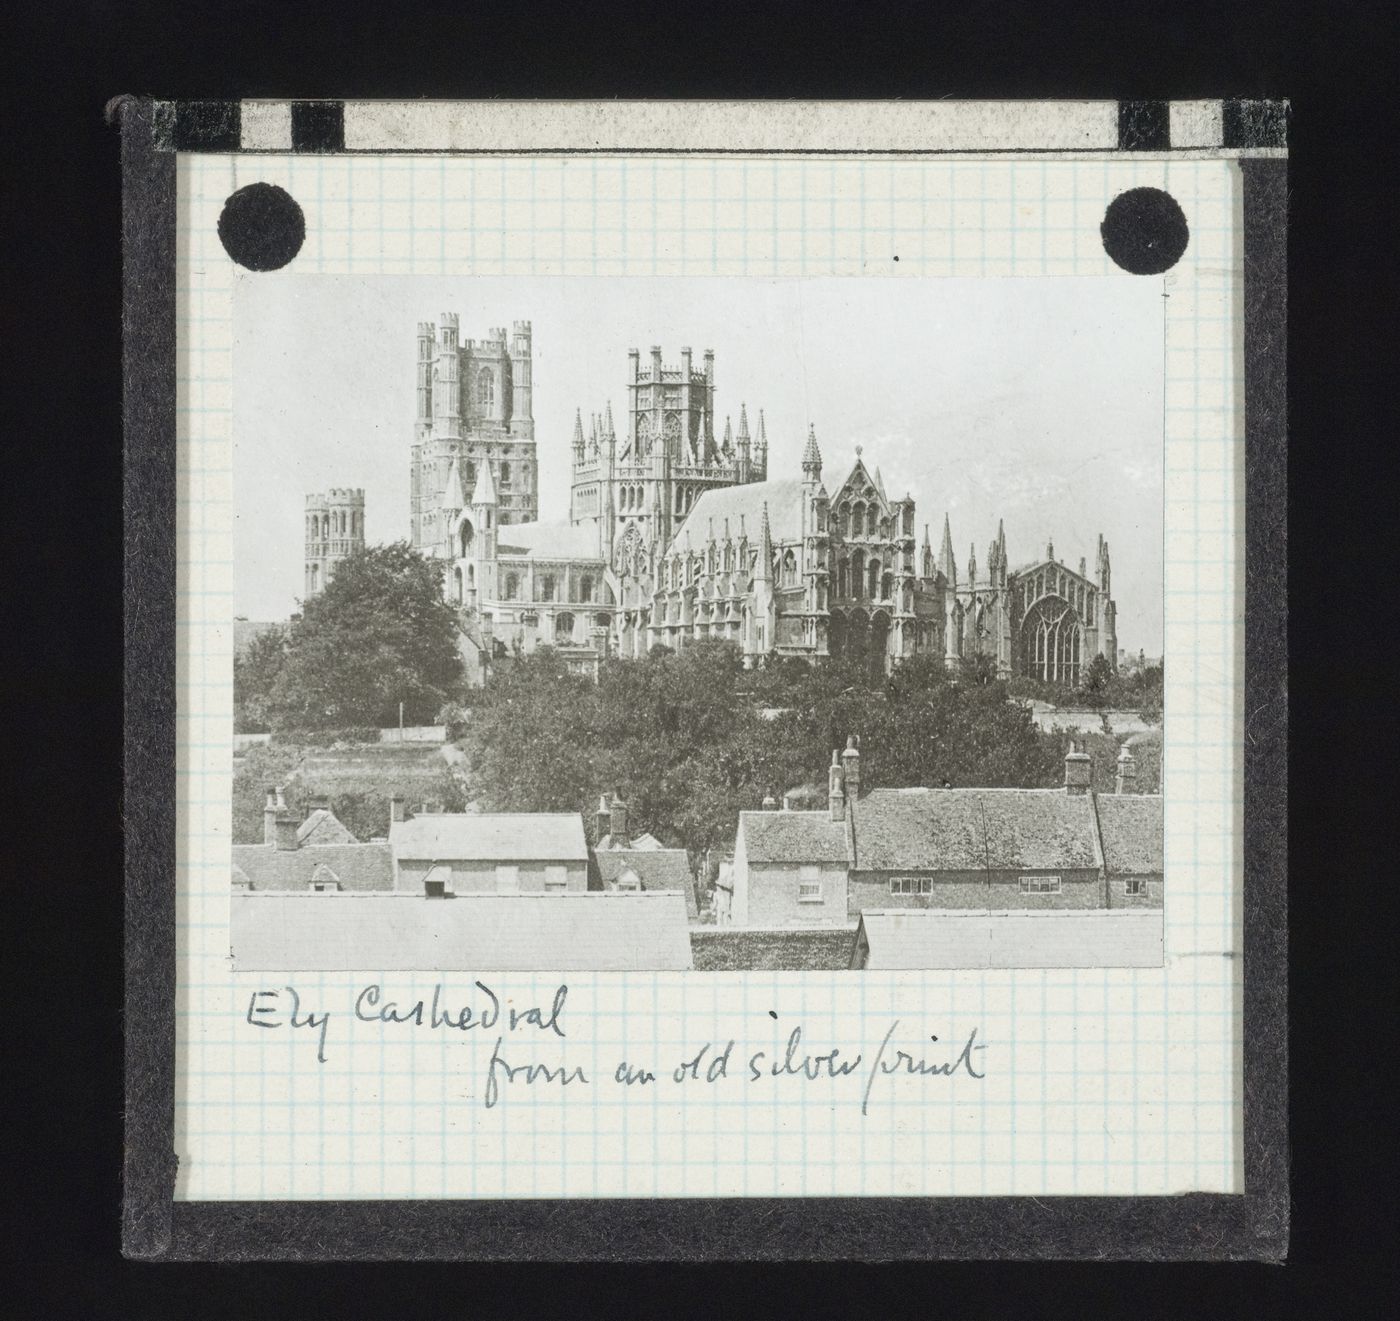 View of Ely Cathedral from silver print by unknown photographer, Ely, Cambridgeshire, England